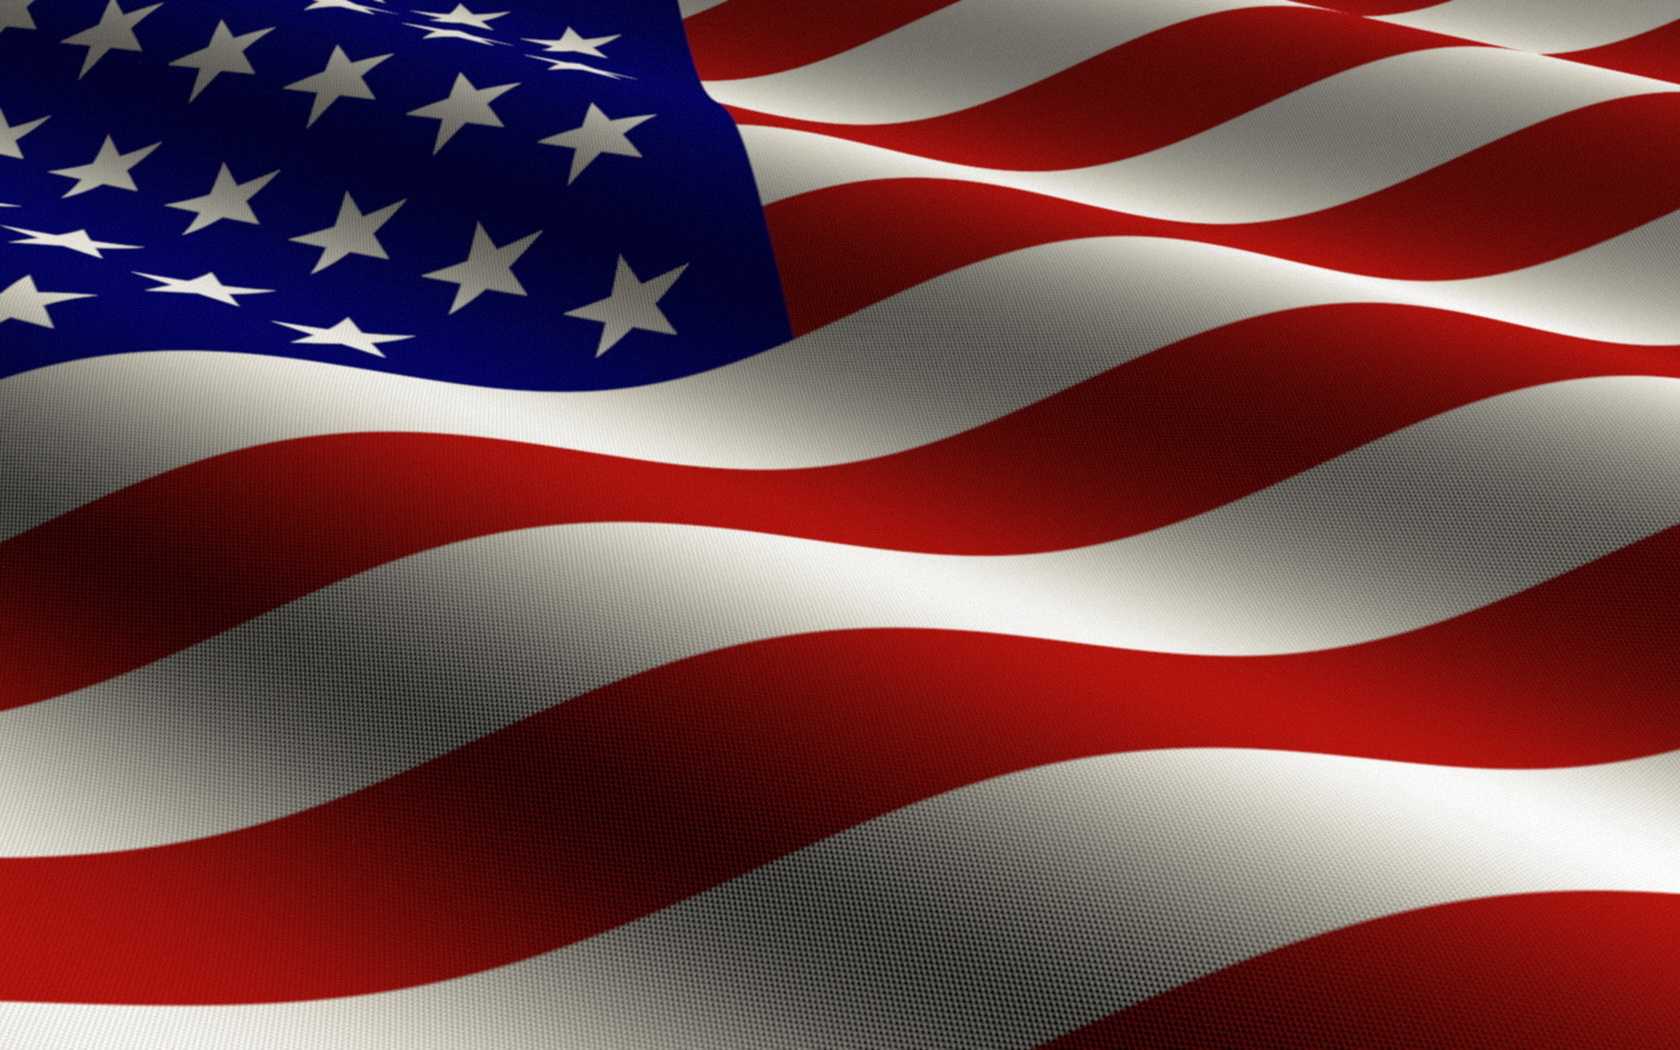 American Flag Backgrounds For Powerpoint Templates – Ppt Inside American Flag Powerpoint Template